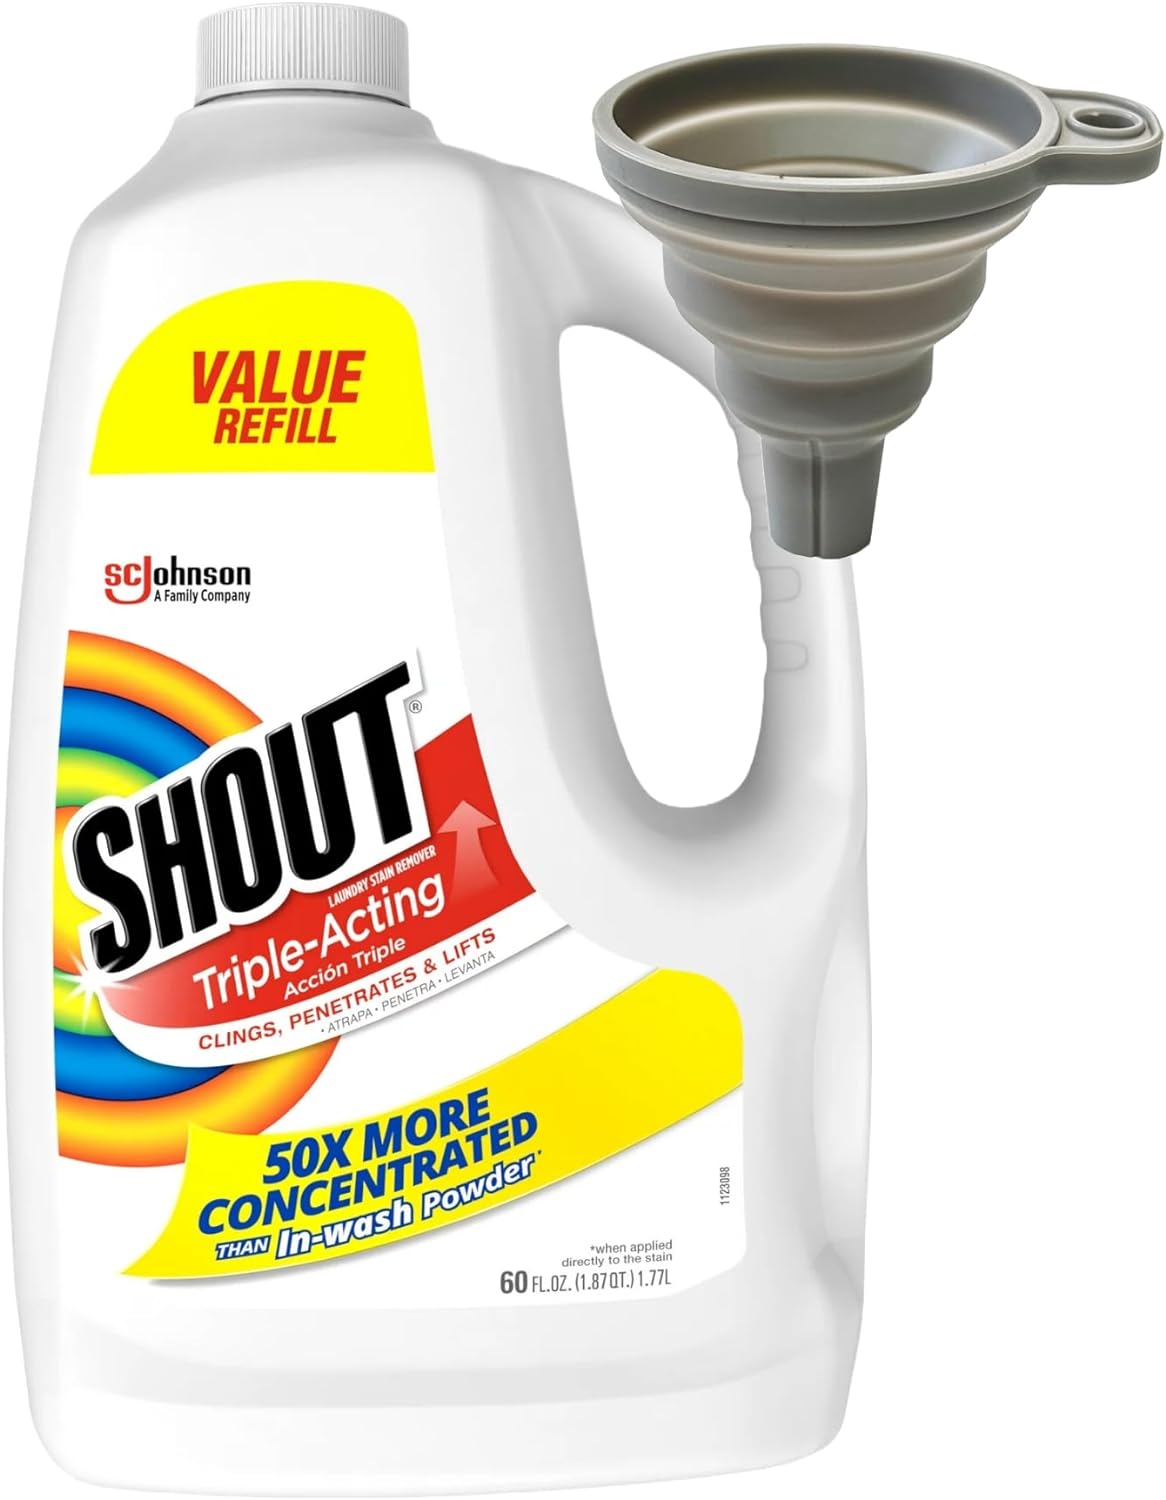 'Shout' Stain Remover Refill 60 Fl Oz. Includes PureDealus Foldable Silicone Funnel. 2 Piece Set